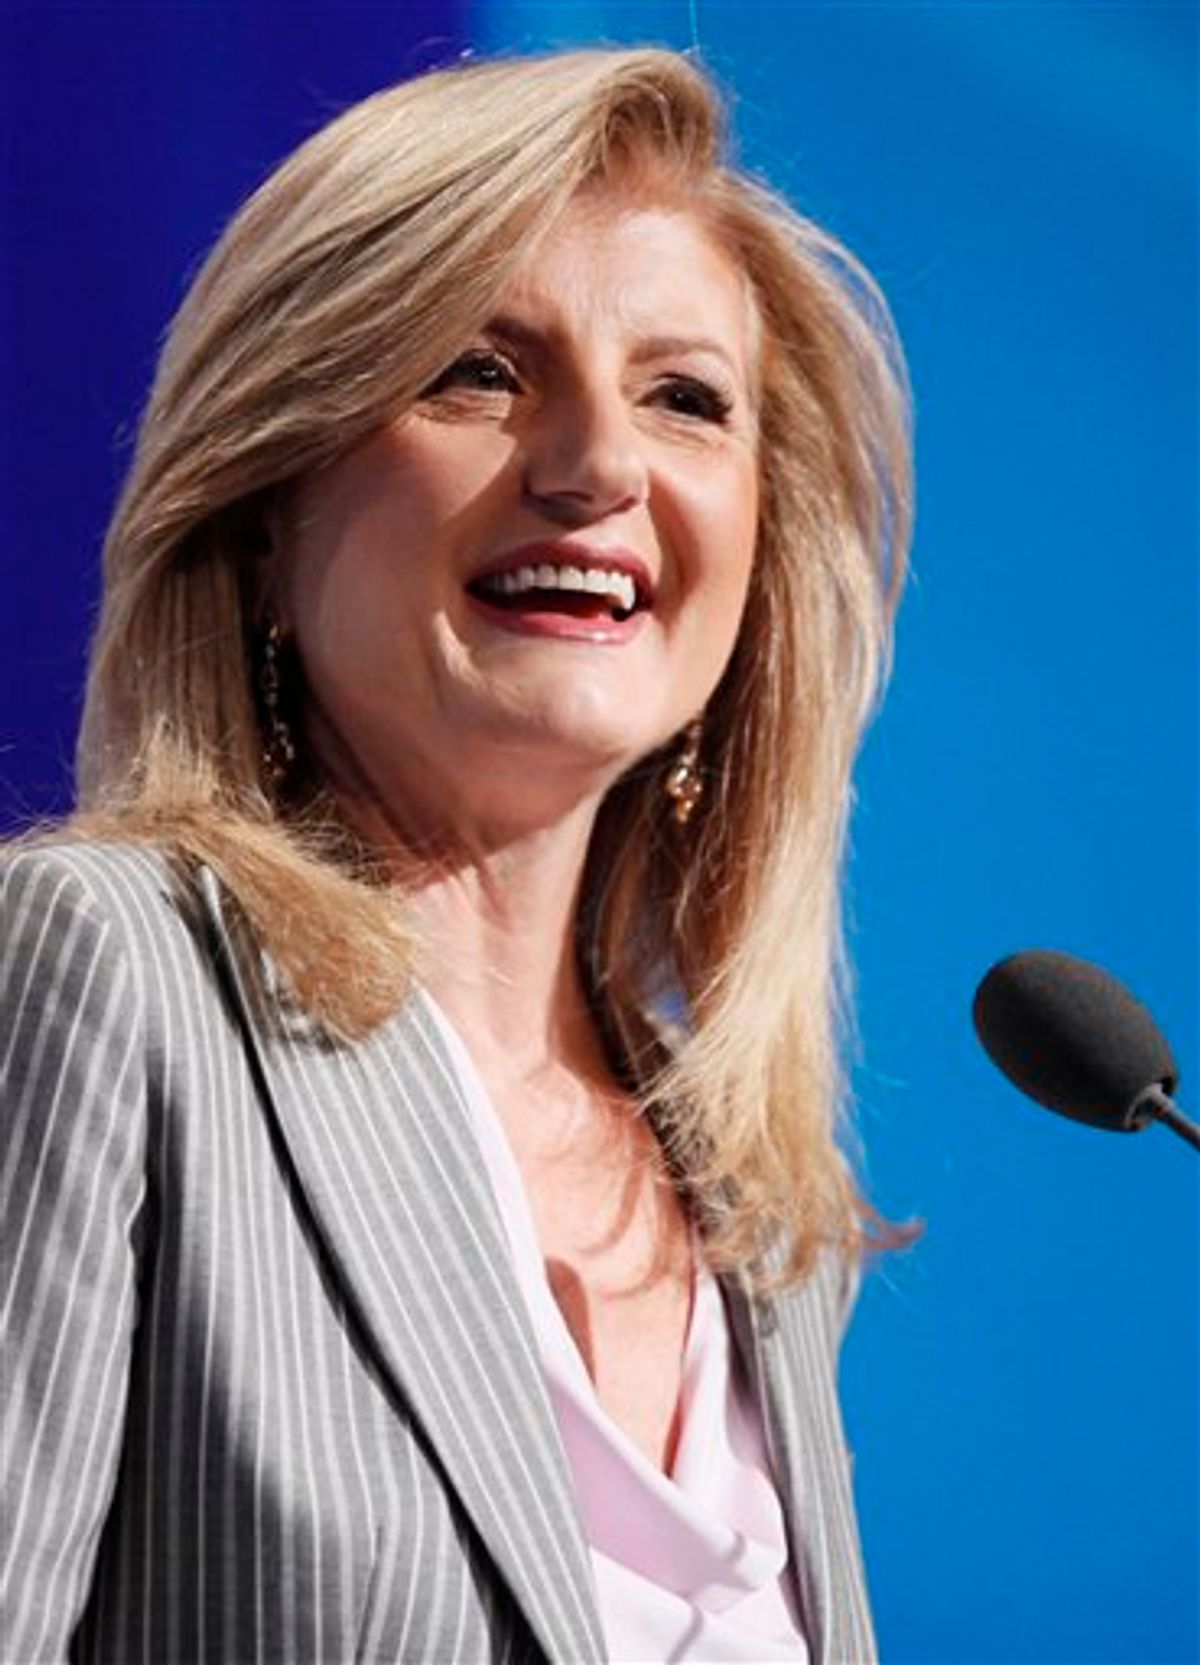 FILE - In this Sept. 23, 2010 file photo, Arianna Huffington speaks at the Clinton Global Initiative in New York.   It was announced Monday Feb. 7, 2011 that AOL Inc. is buying online news hub Huffington Post and that Huffington will be put in charge of AOL's growing array of content.  (AP Photo/Mark Lennihan, file) (AP)